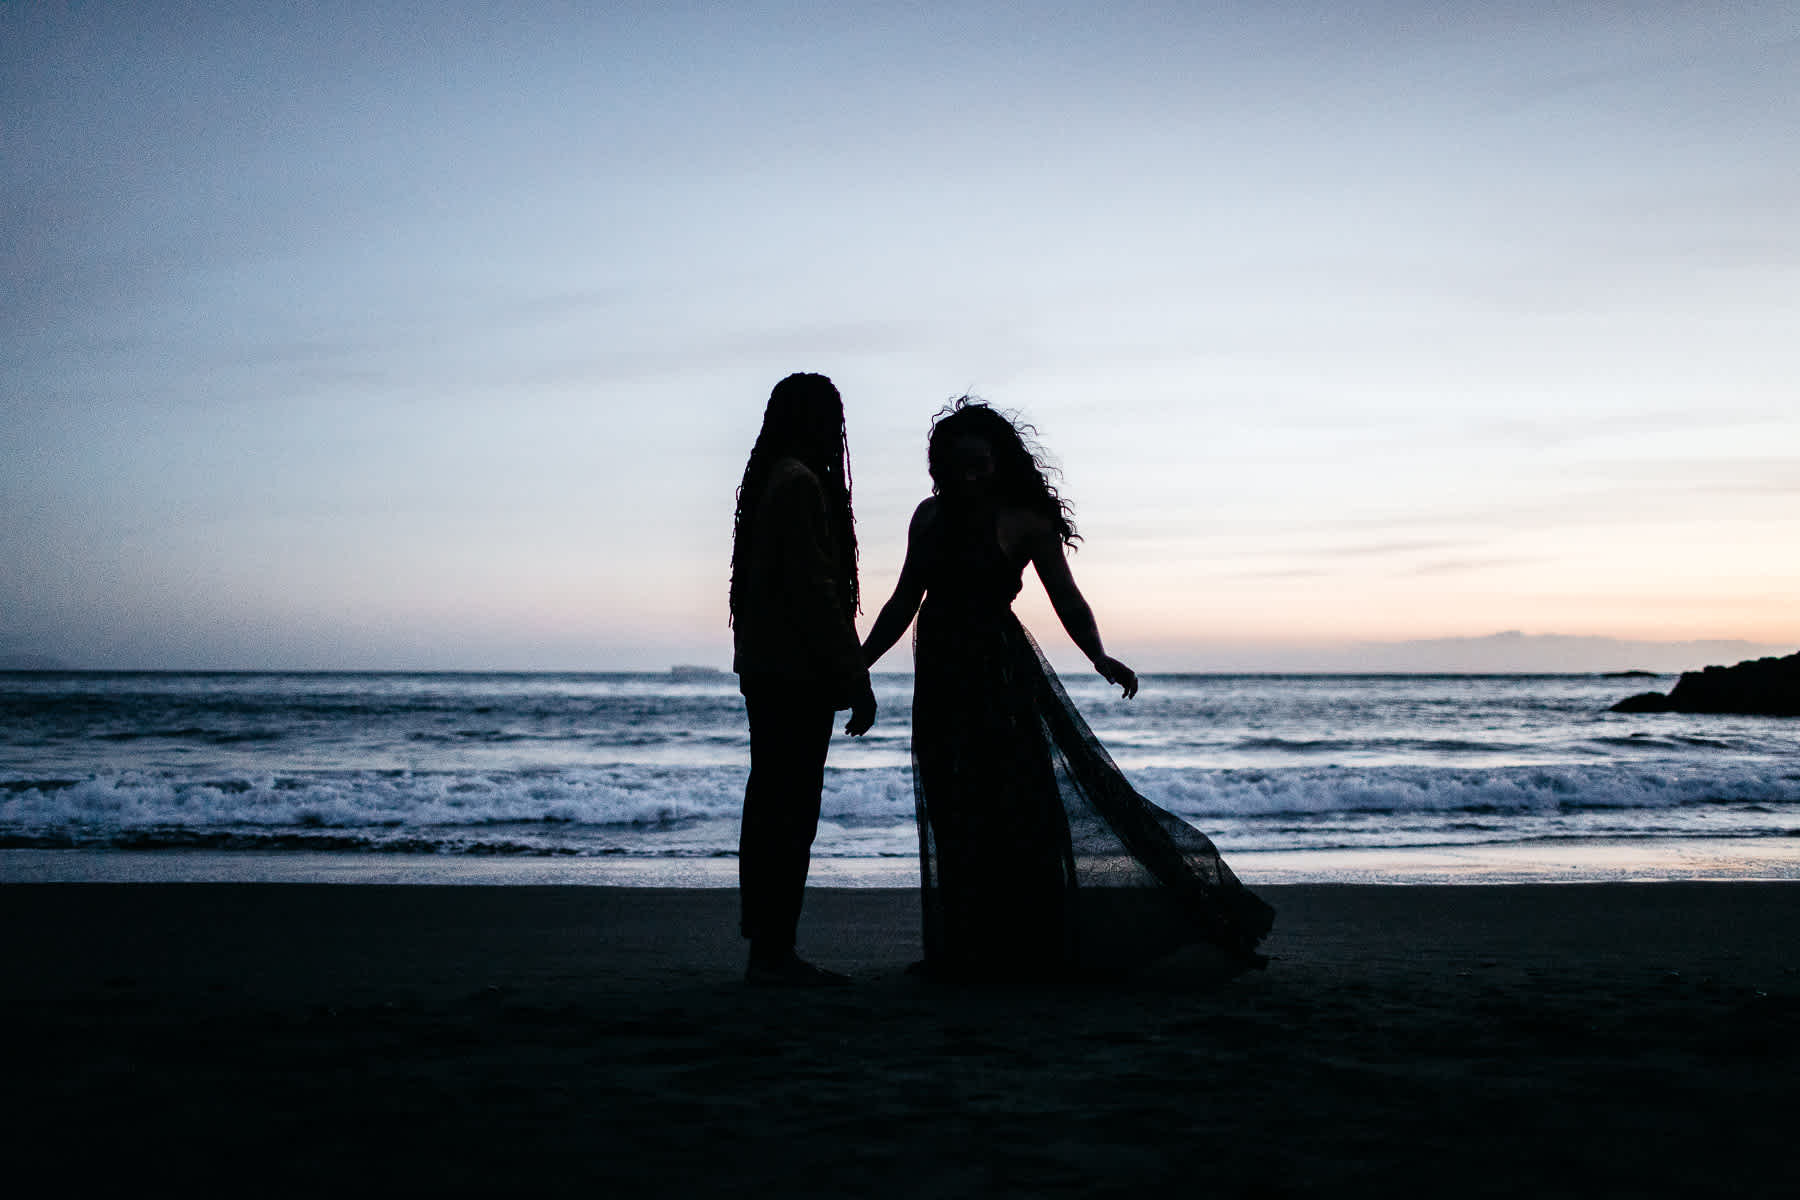 muir-beach-ca-spring-lifestyle-engagement-session-60